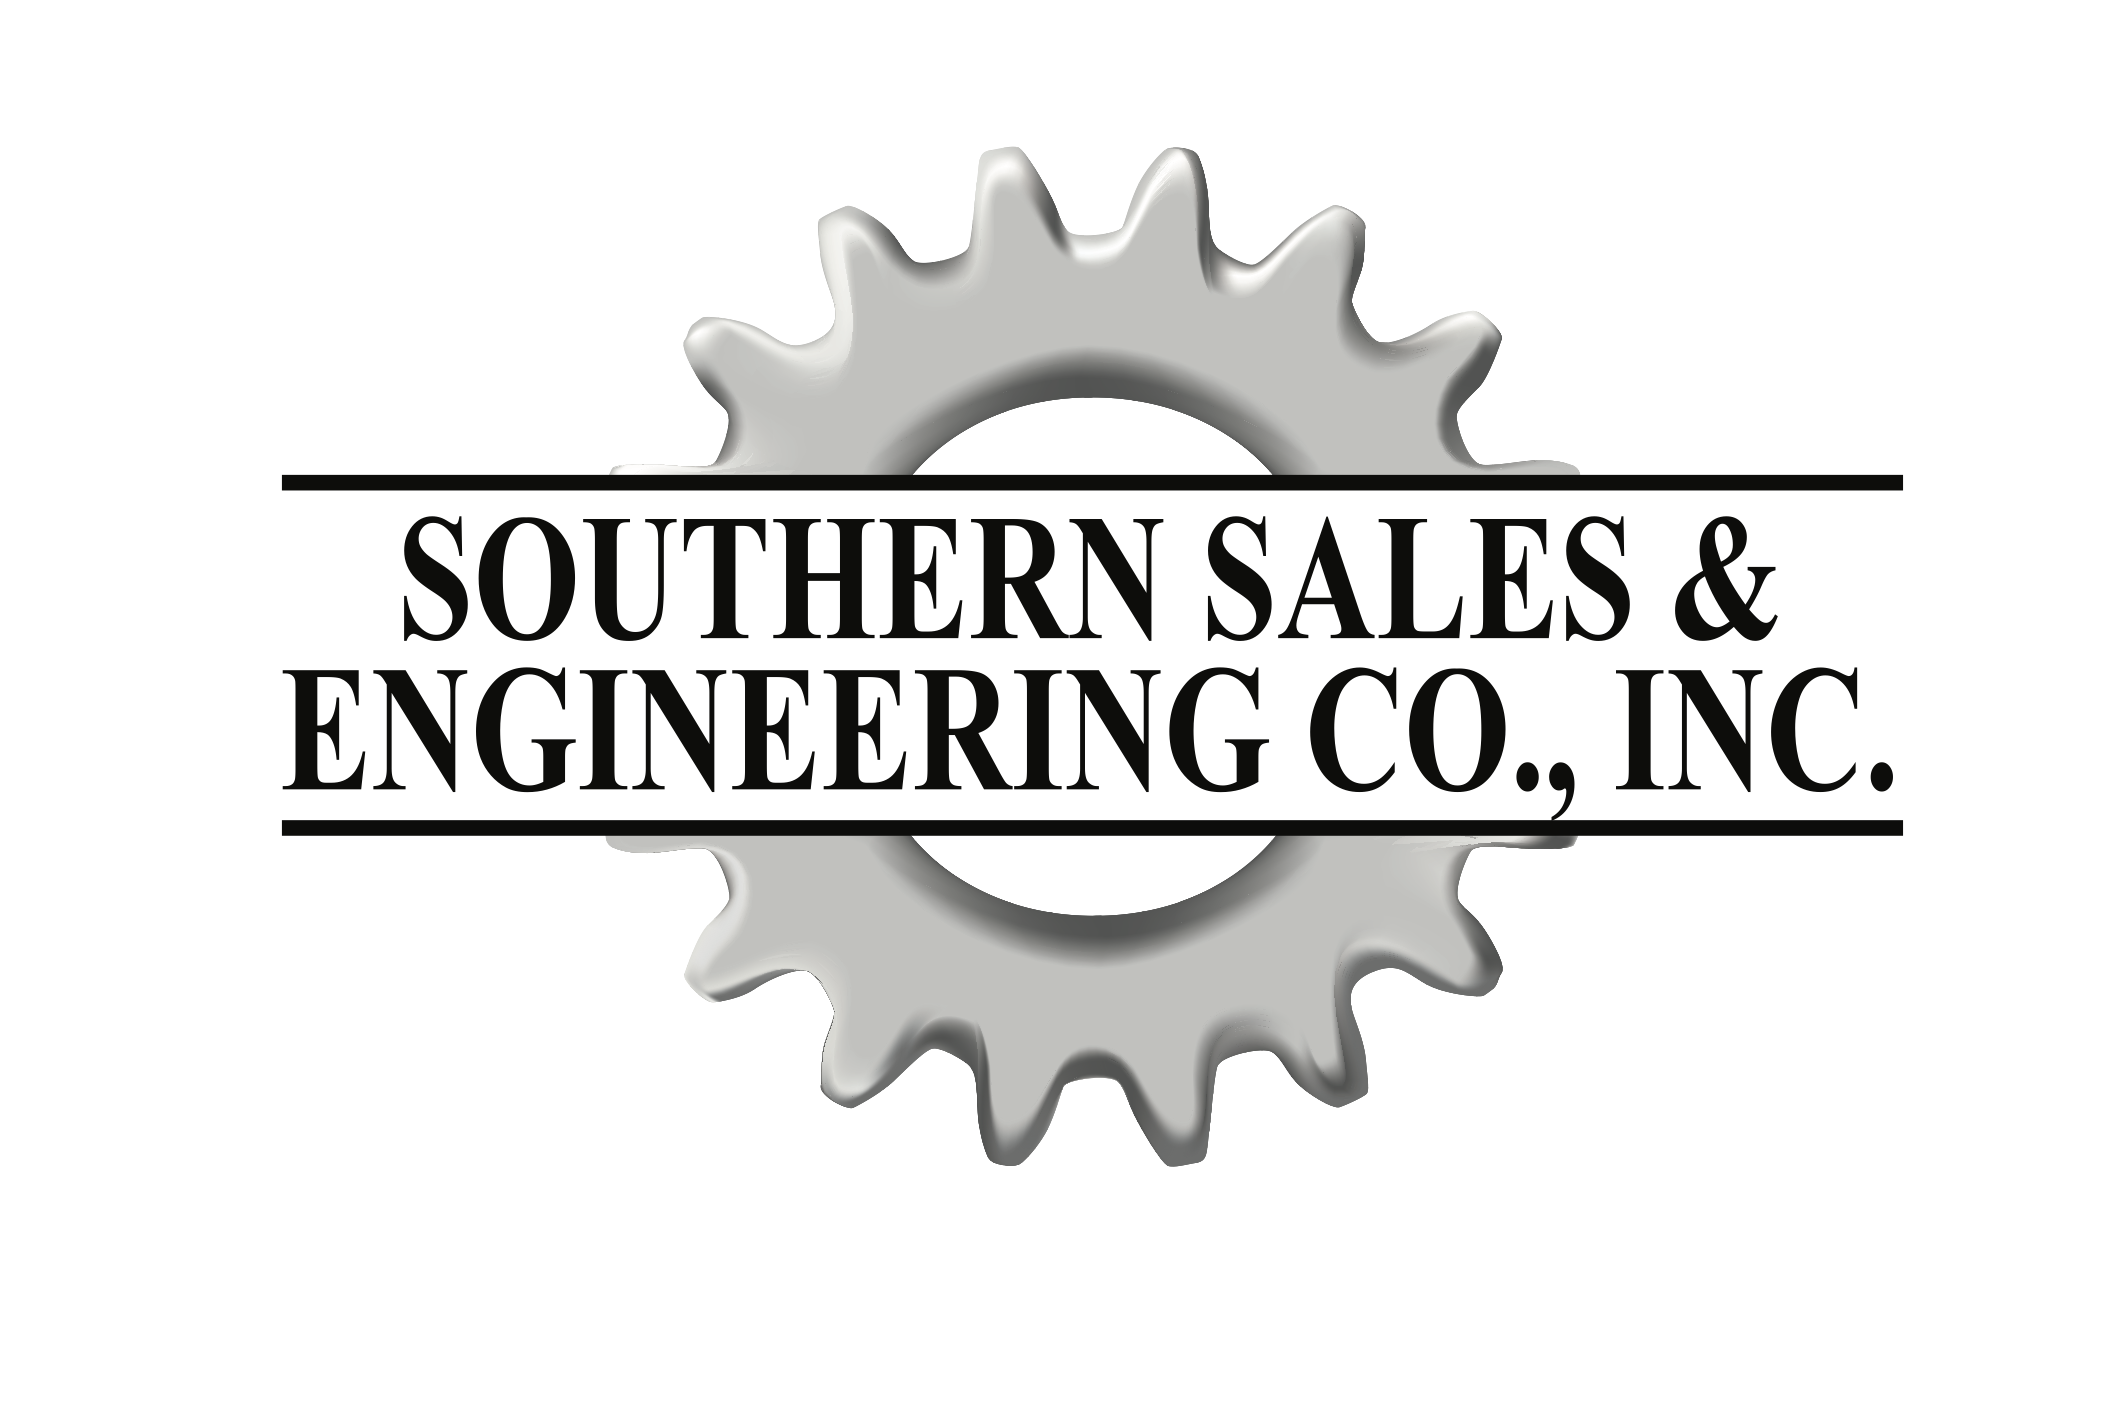 Southern Sales & Engineering Co., Inc.